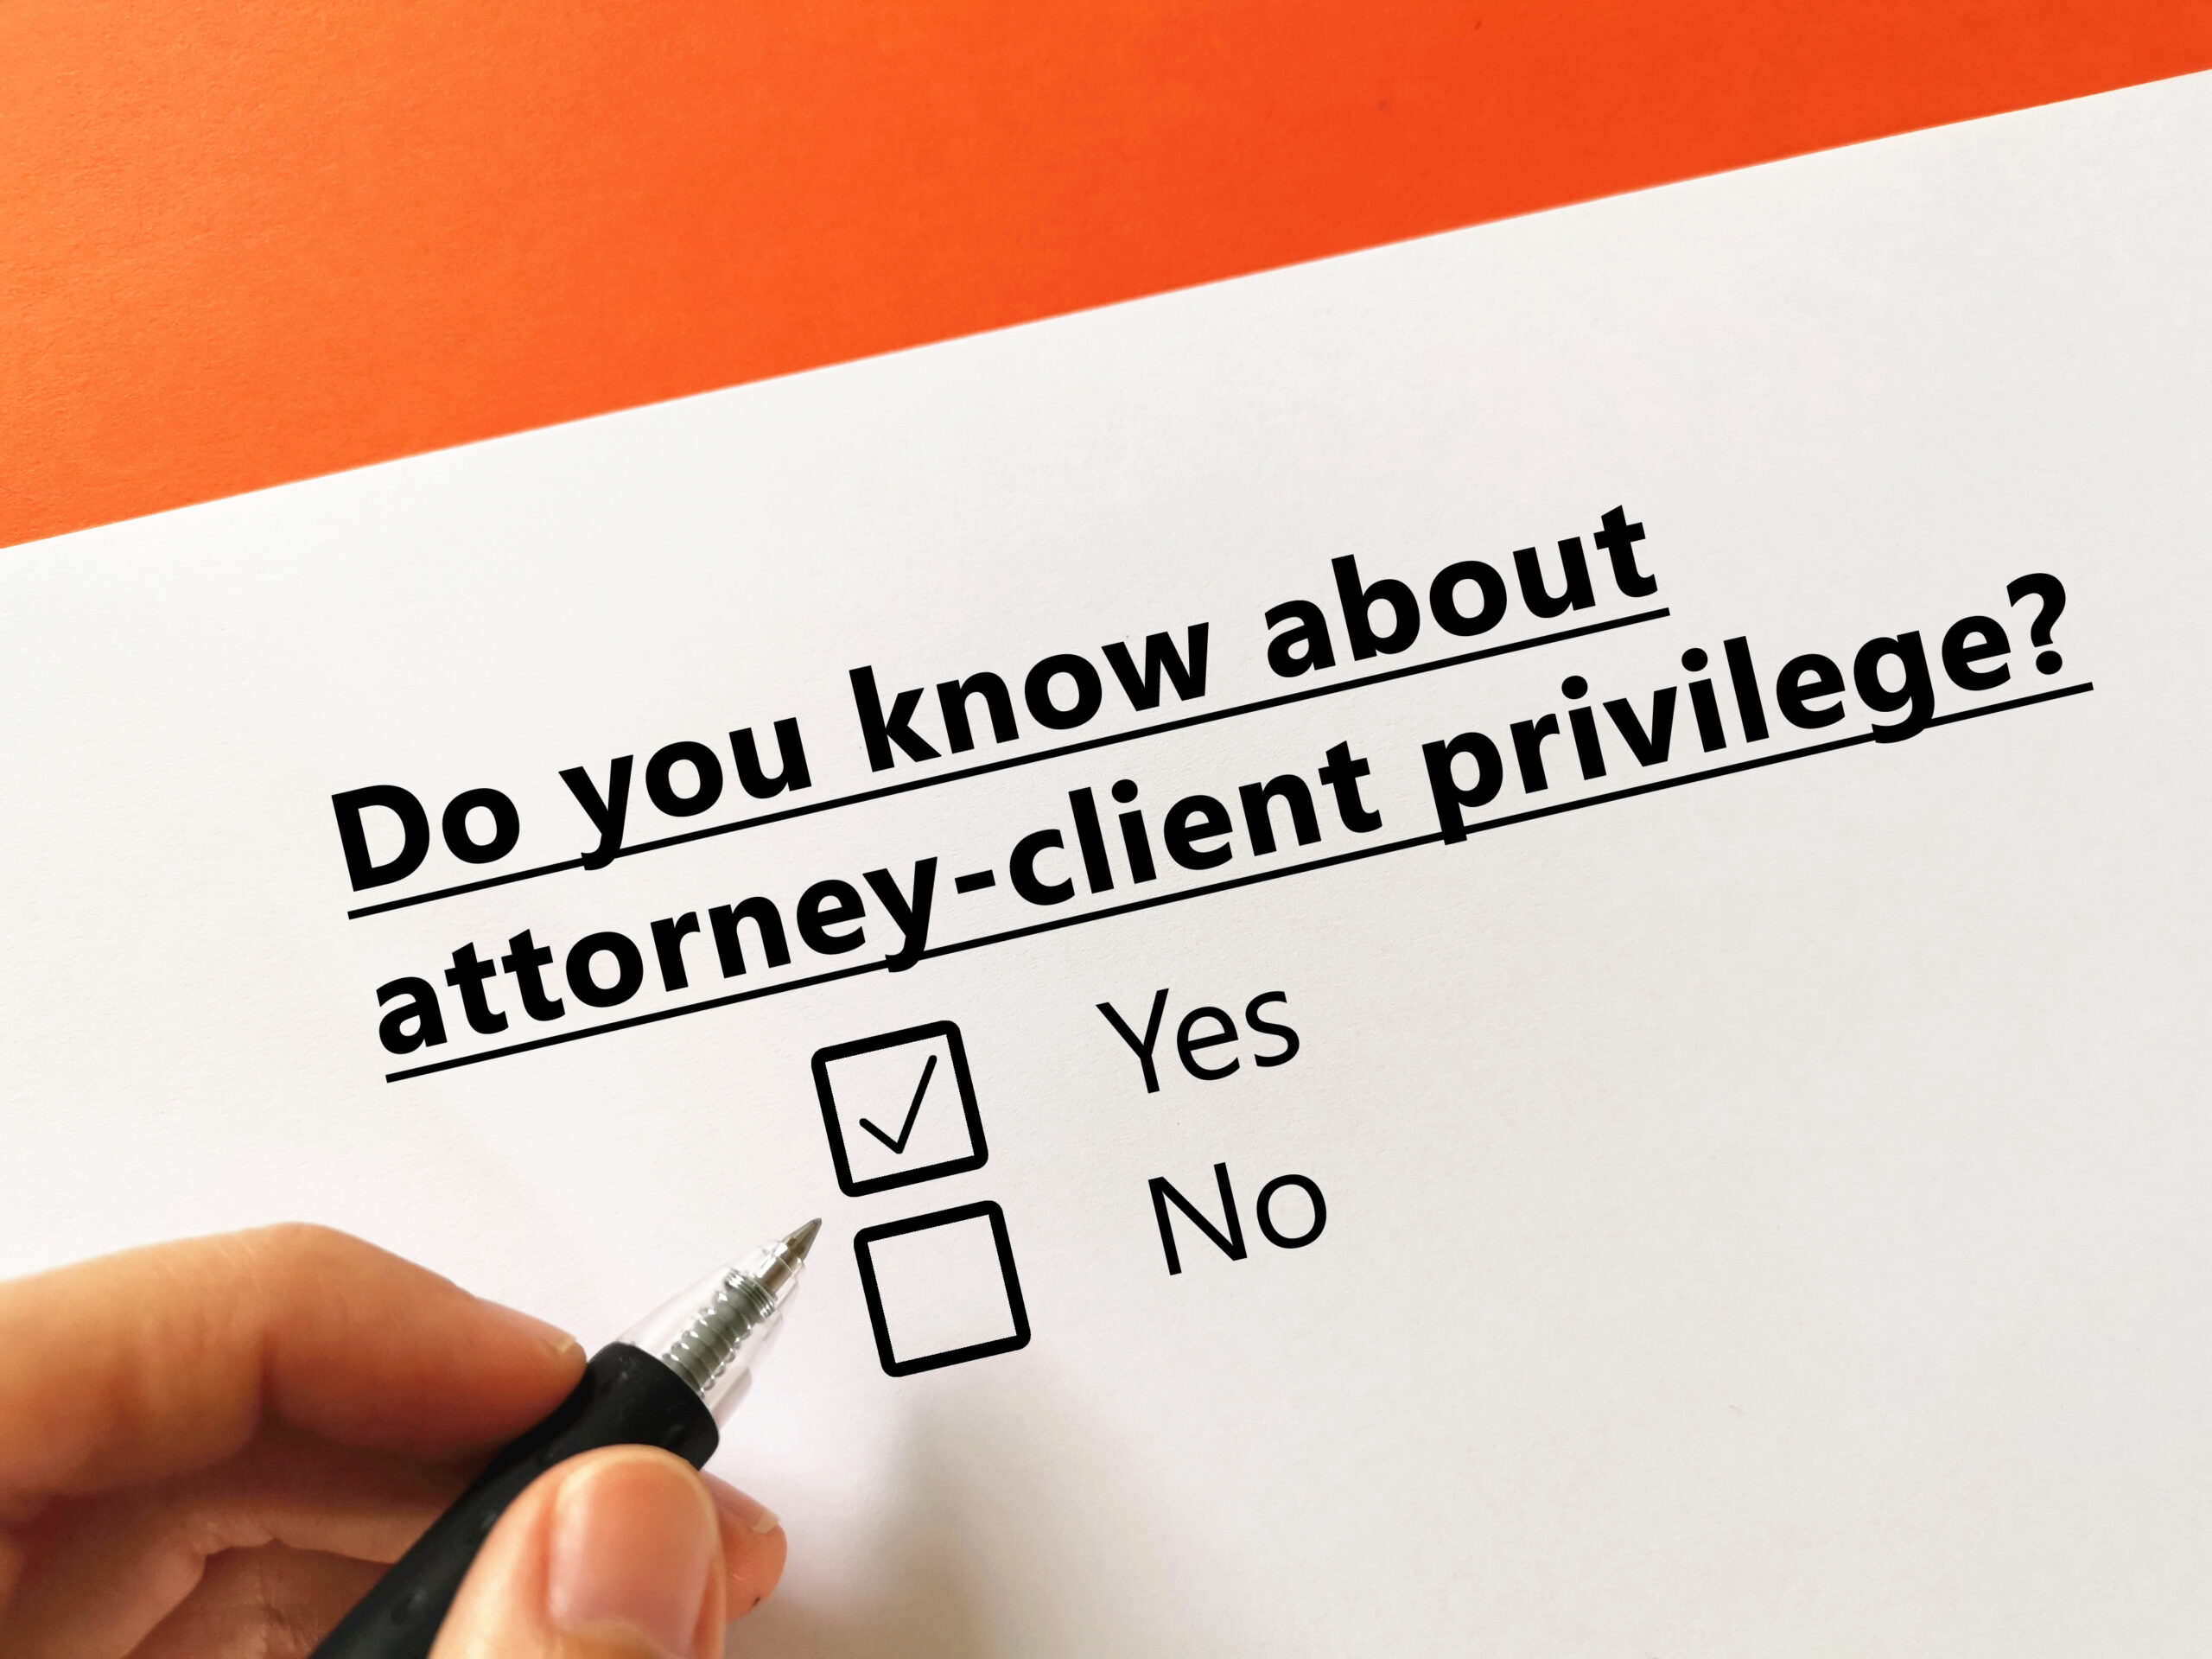 Paper and pen with question about attorney-client privilege and yes/no checkboxes